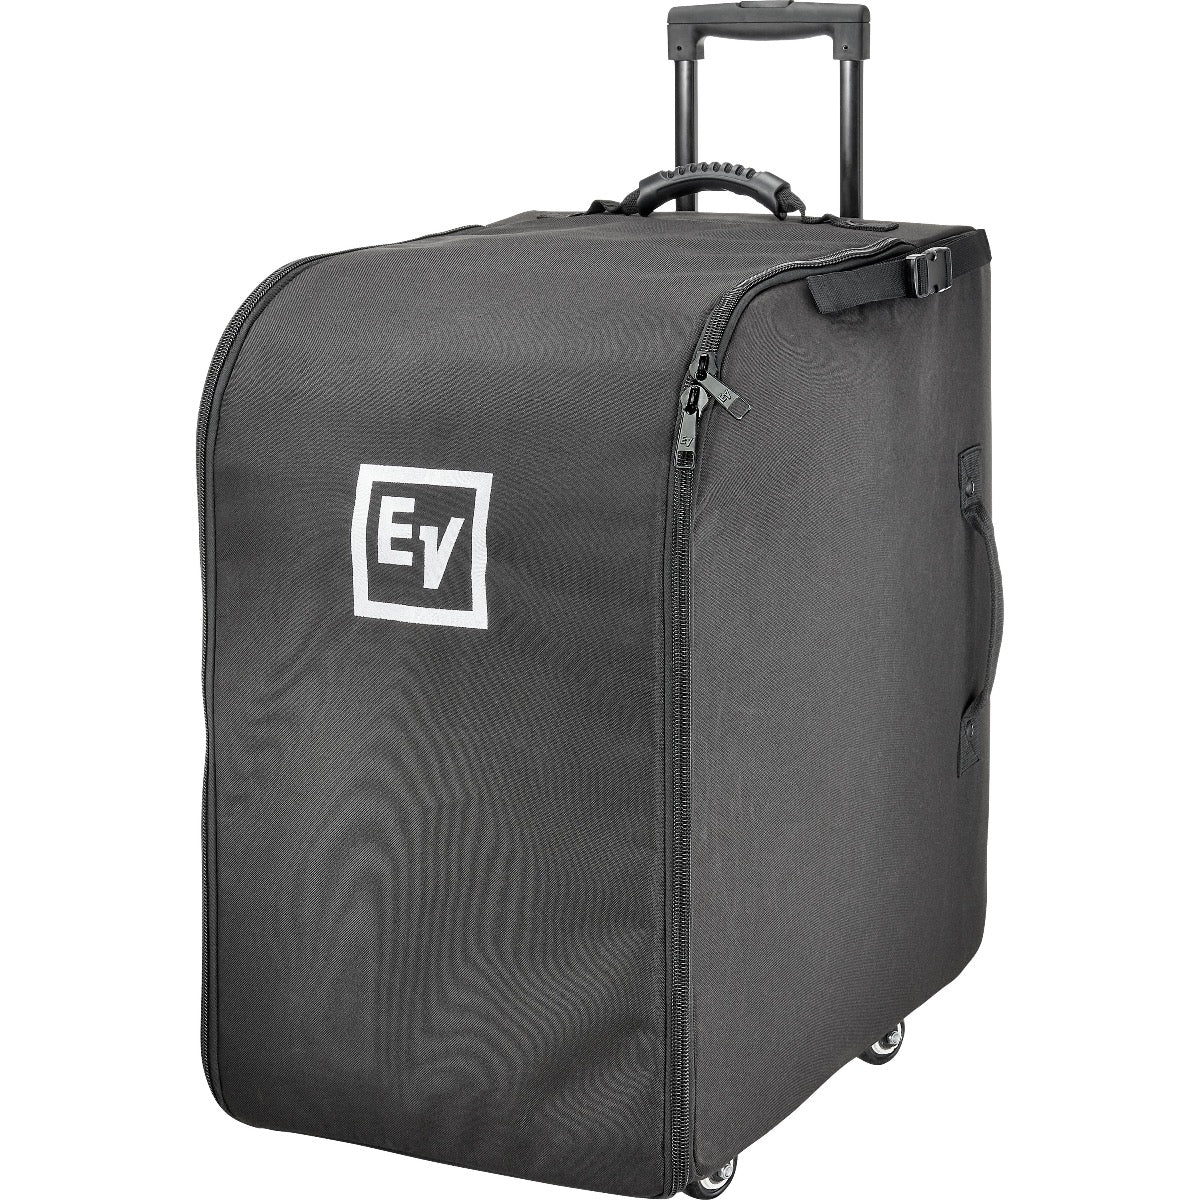 3/4 view of Electro-Voice Evolve 30M Rolling Case showing front, right side and top